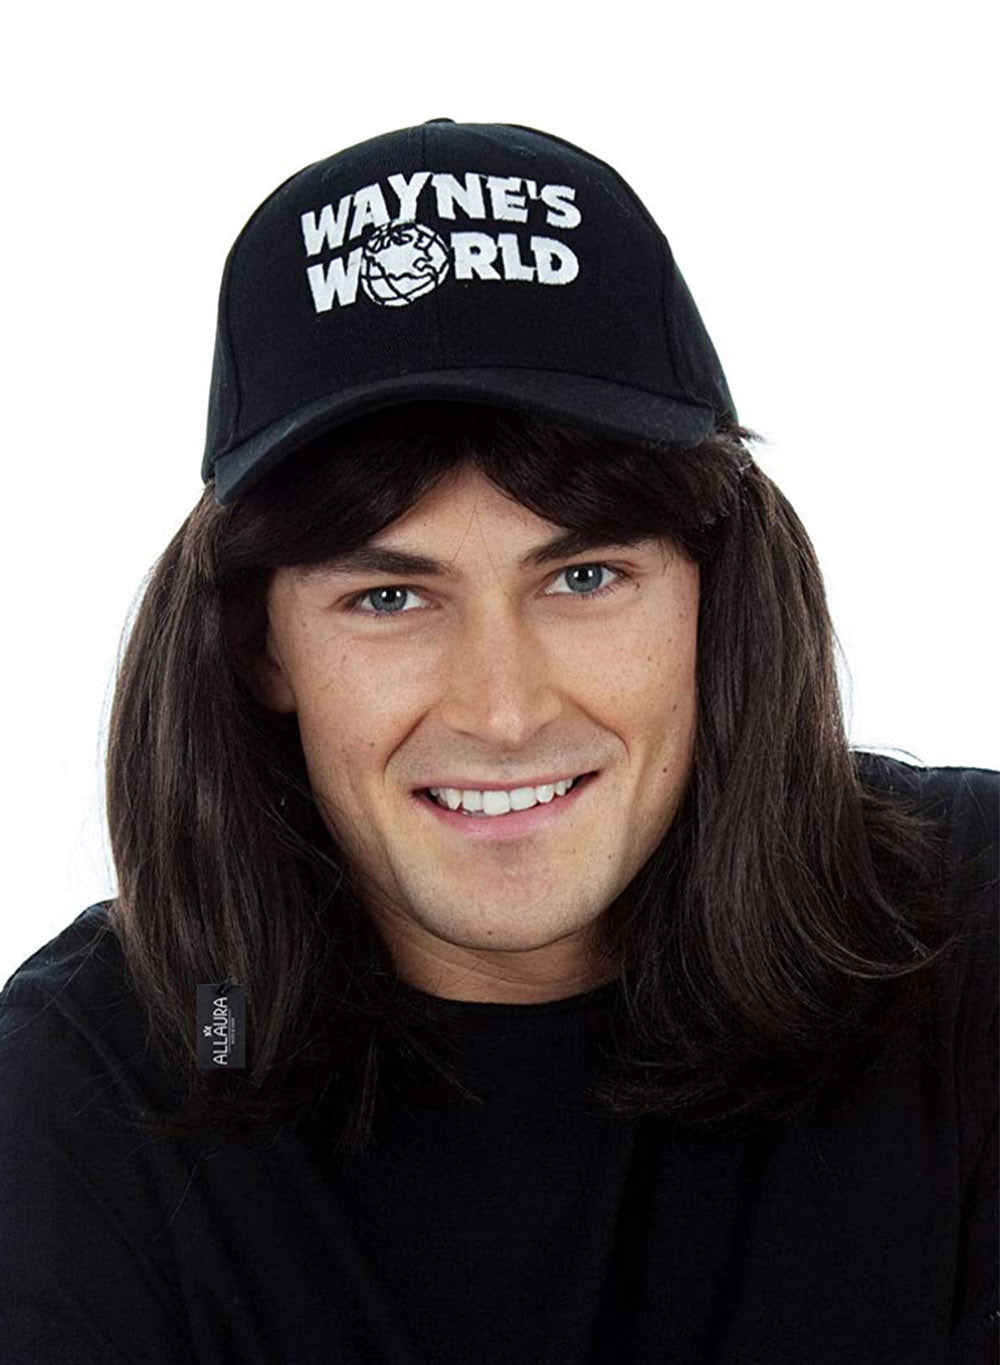 80s Heavy Metal Rocker Wig with Hat Costume Set - Wayne Campbell from Waynes World